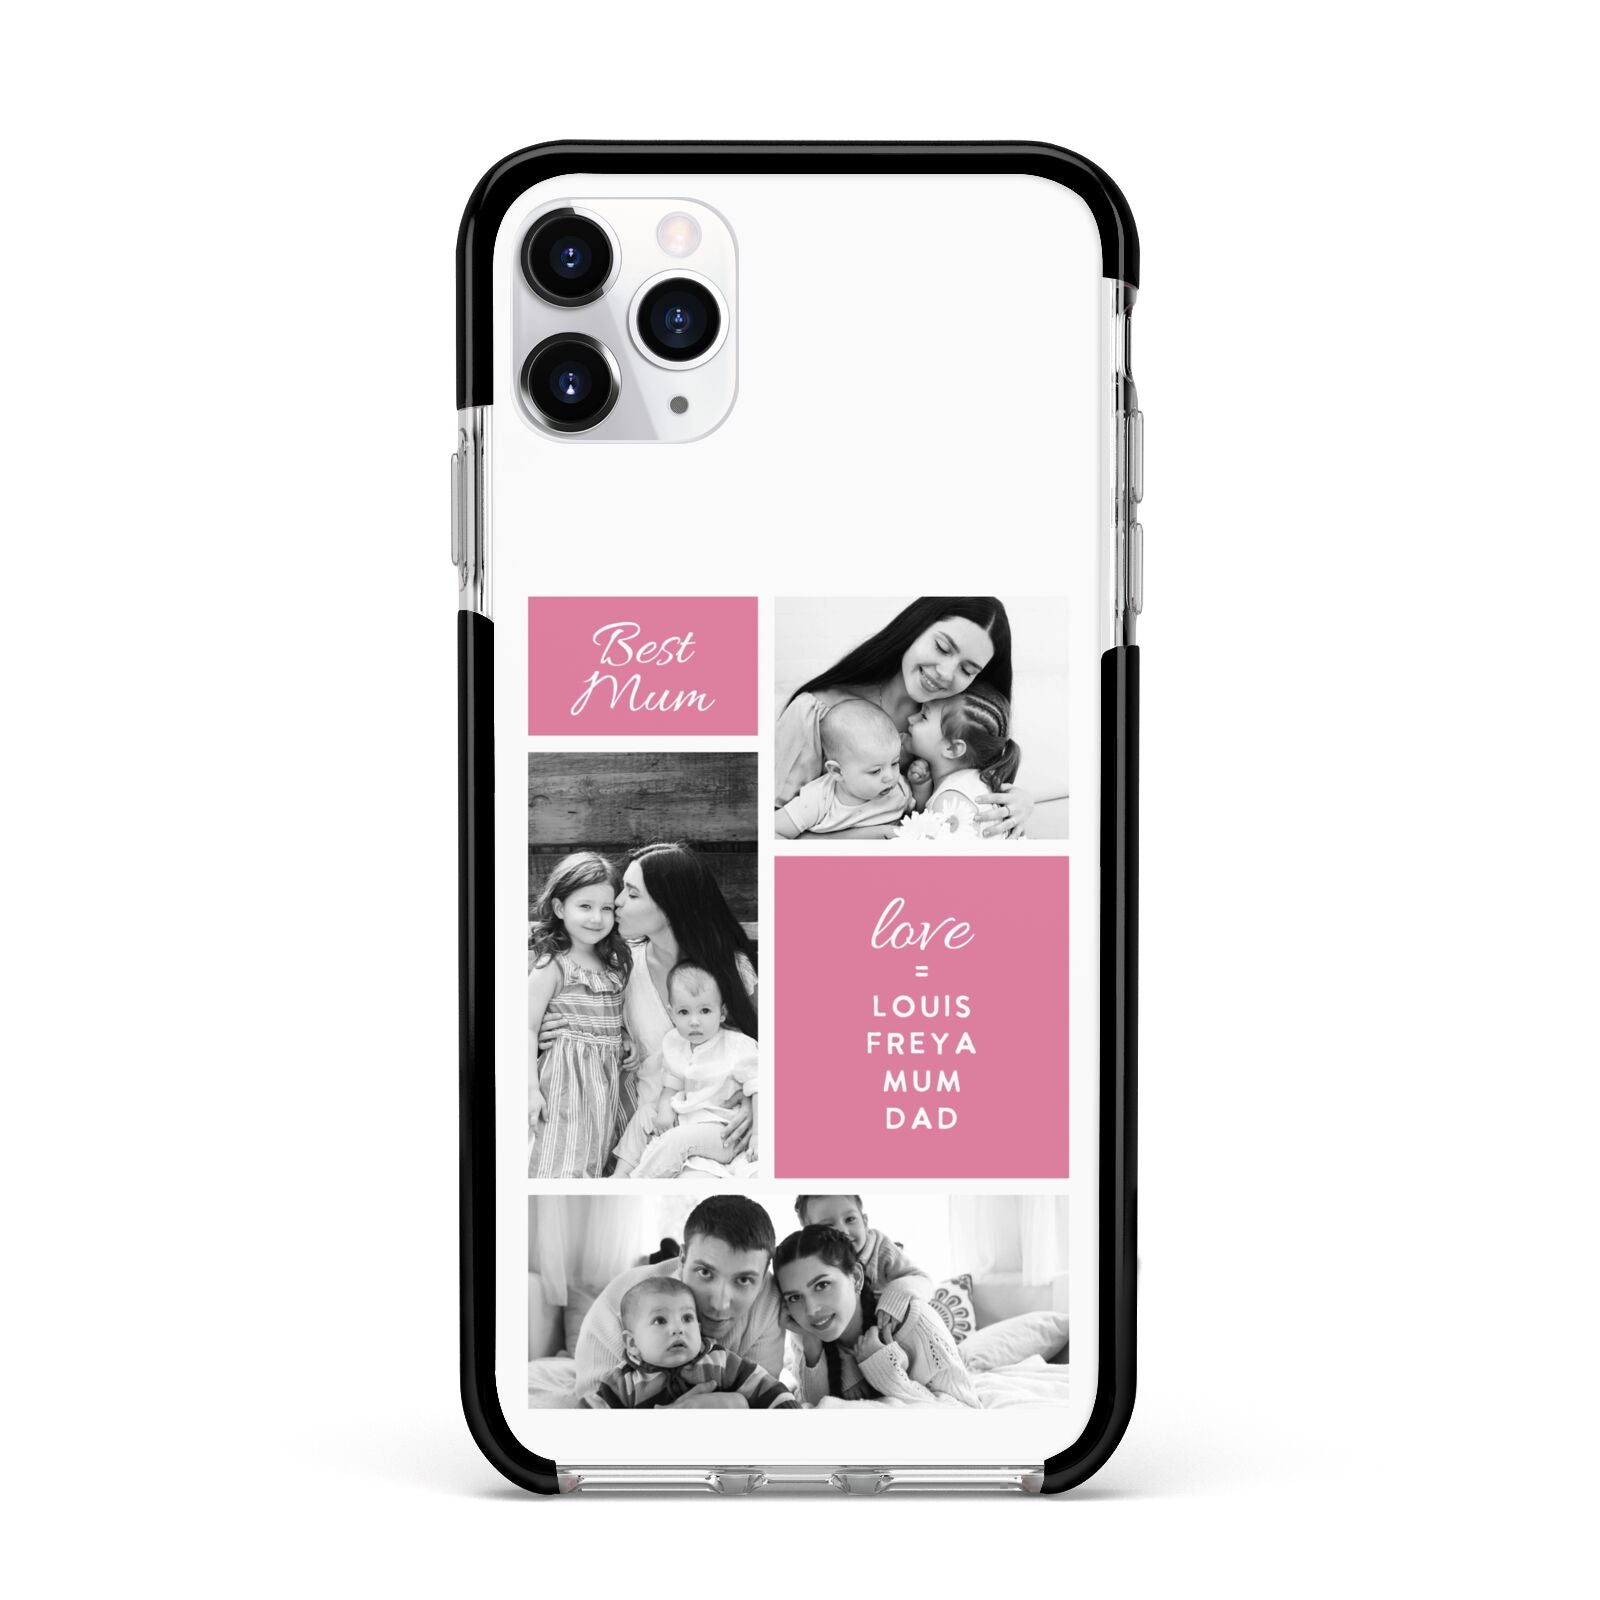 Best Mum Photo Collage Personalised Apple iPhone 11 Pro Max in Silver with Black Impact Case